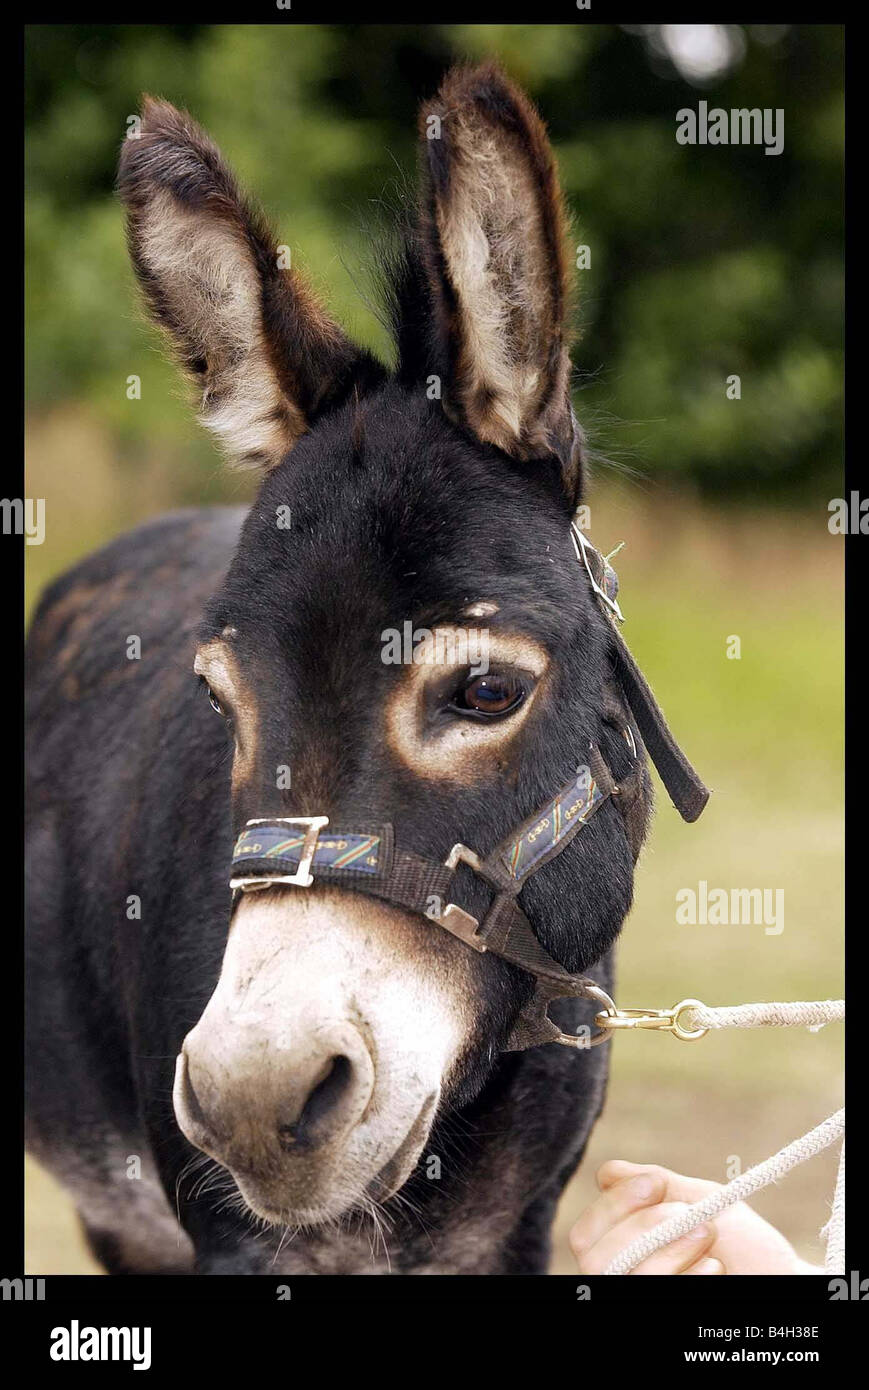 Danny Boy the donkey is unveiled at Edinburgh Zoo today Alan Gordon Education Officer at the Zoo took Danny for a walk and came Stock Photo